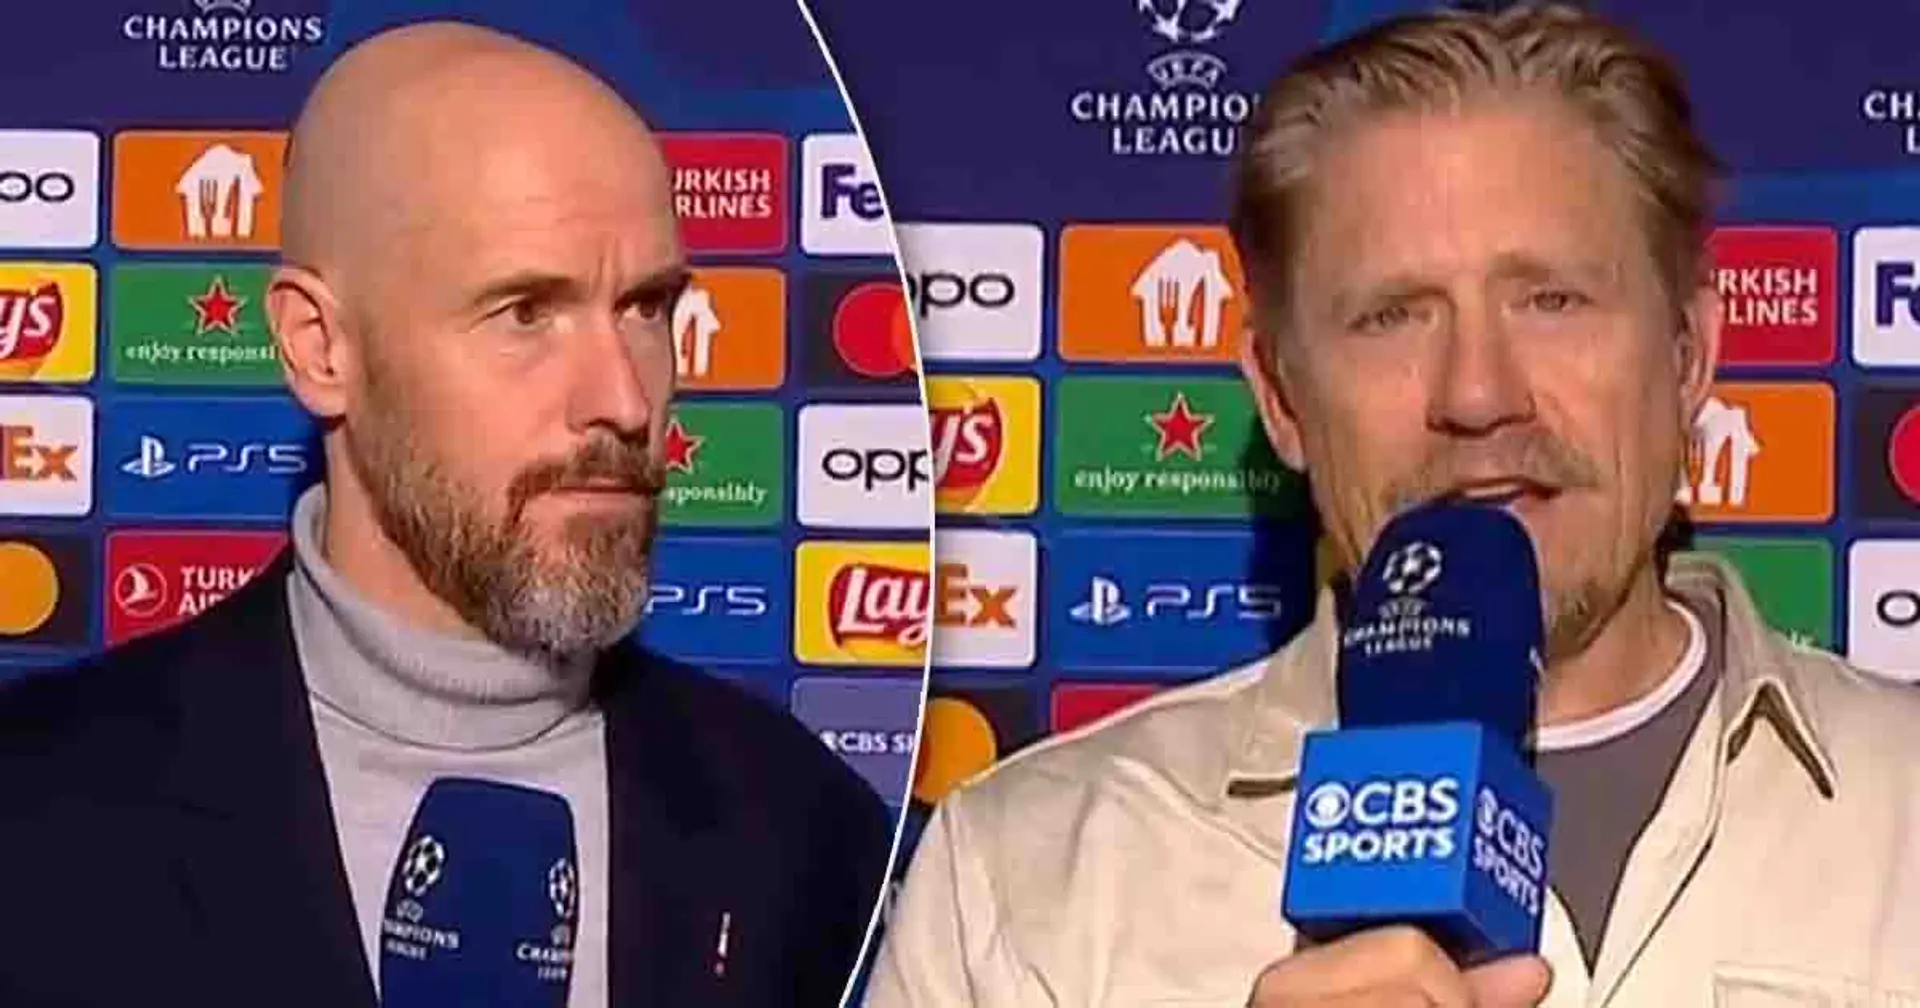 'The defence worked well': Schmeichel calls out Ten Hag for blaming bad defending for Galatasaray draw